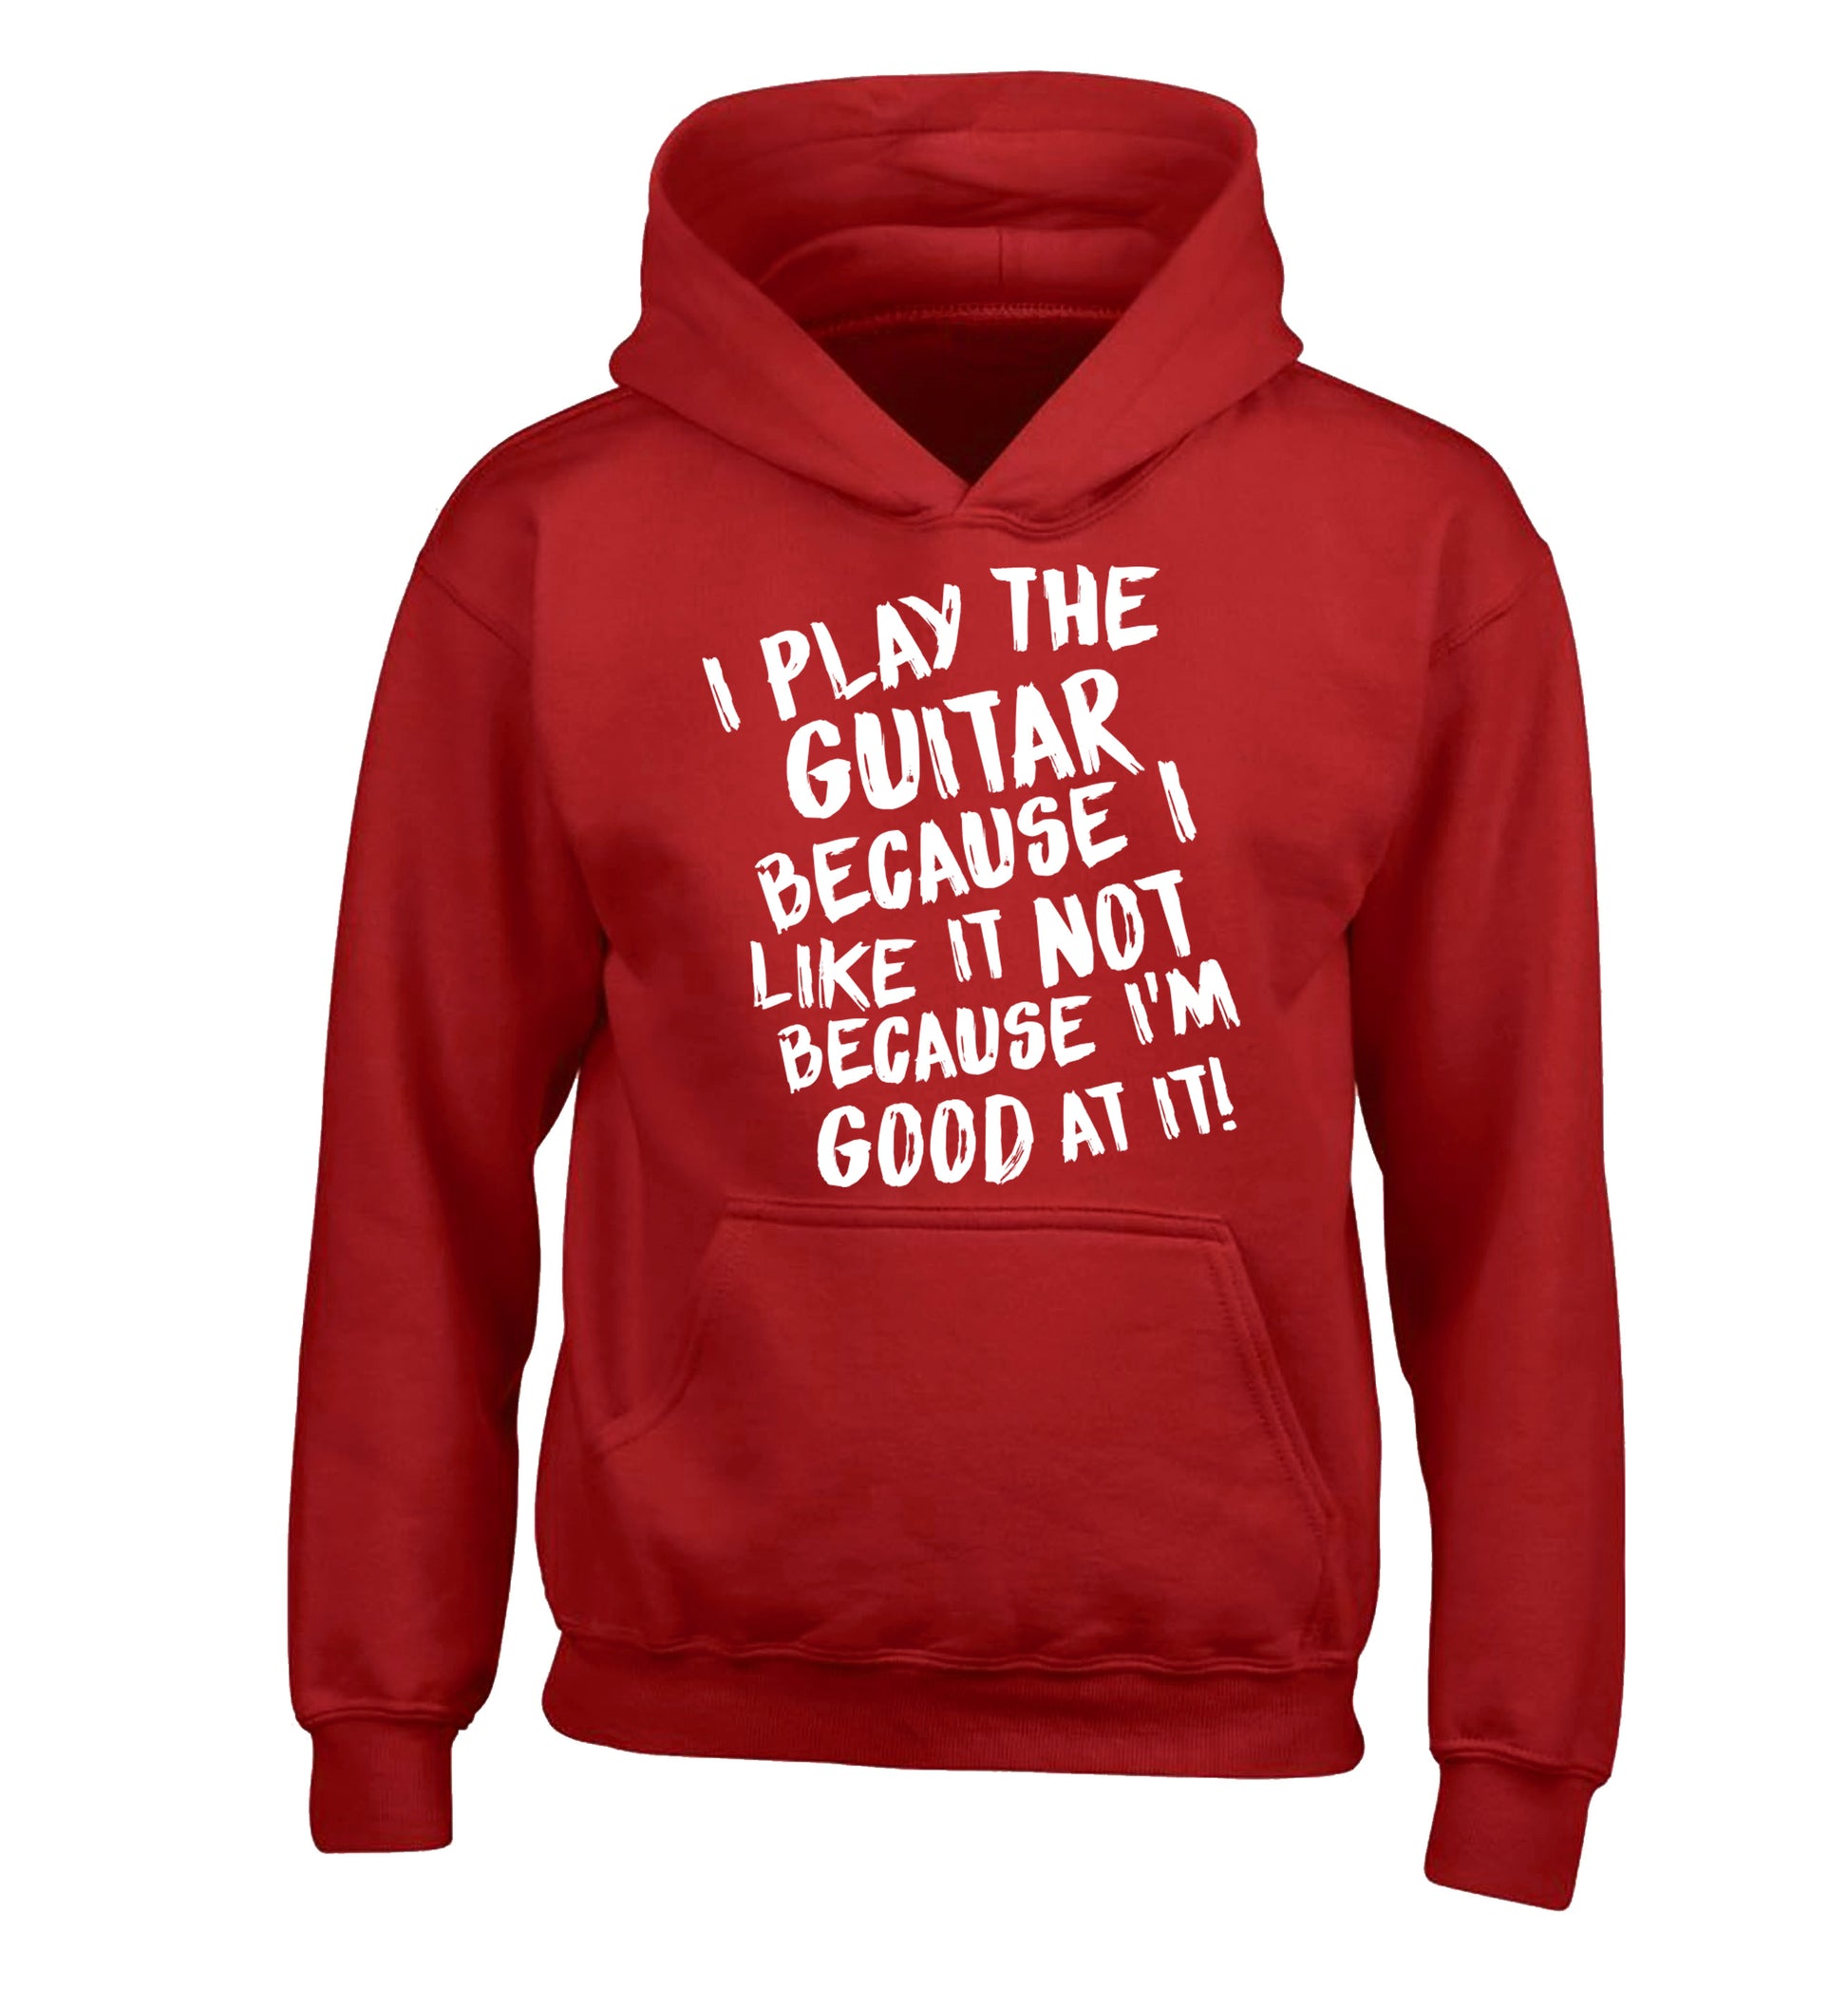 I play the guitar because I like it not because I'm good at it children's red hoodie 12-14 Years